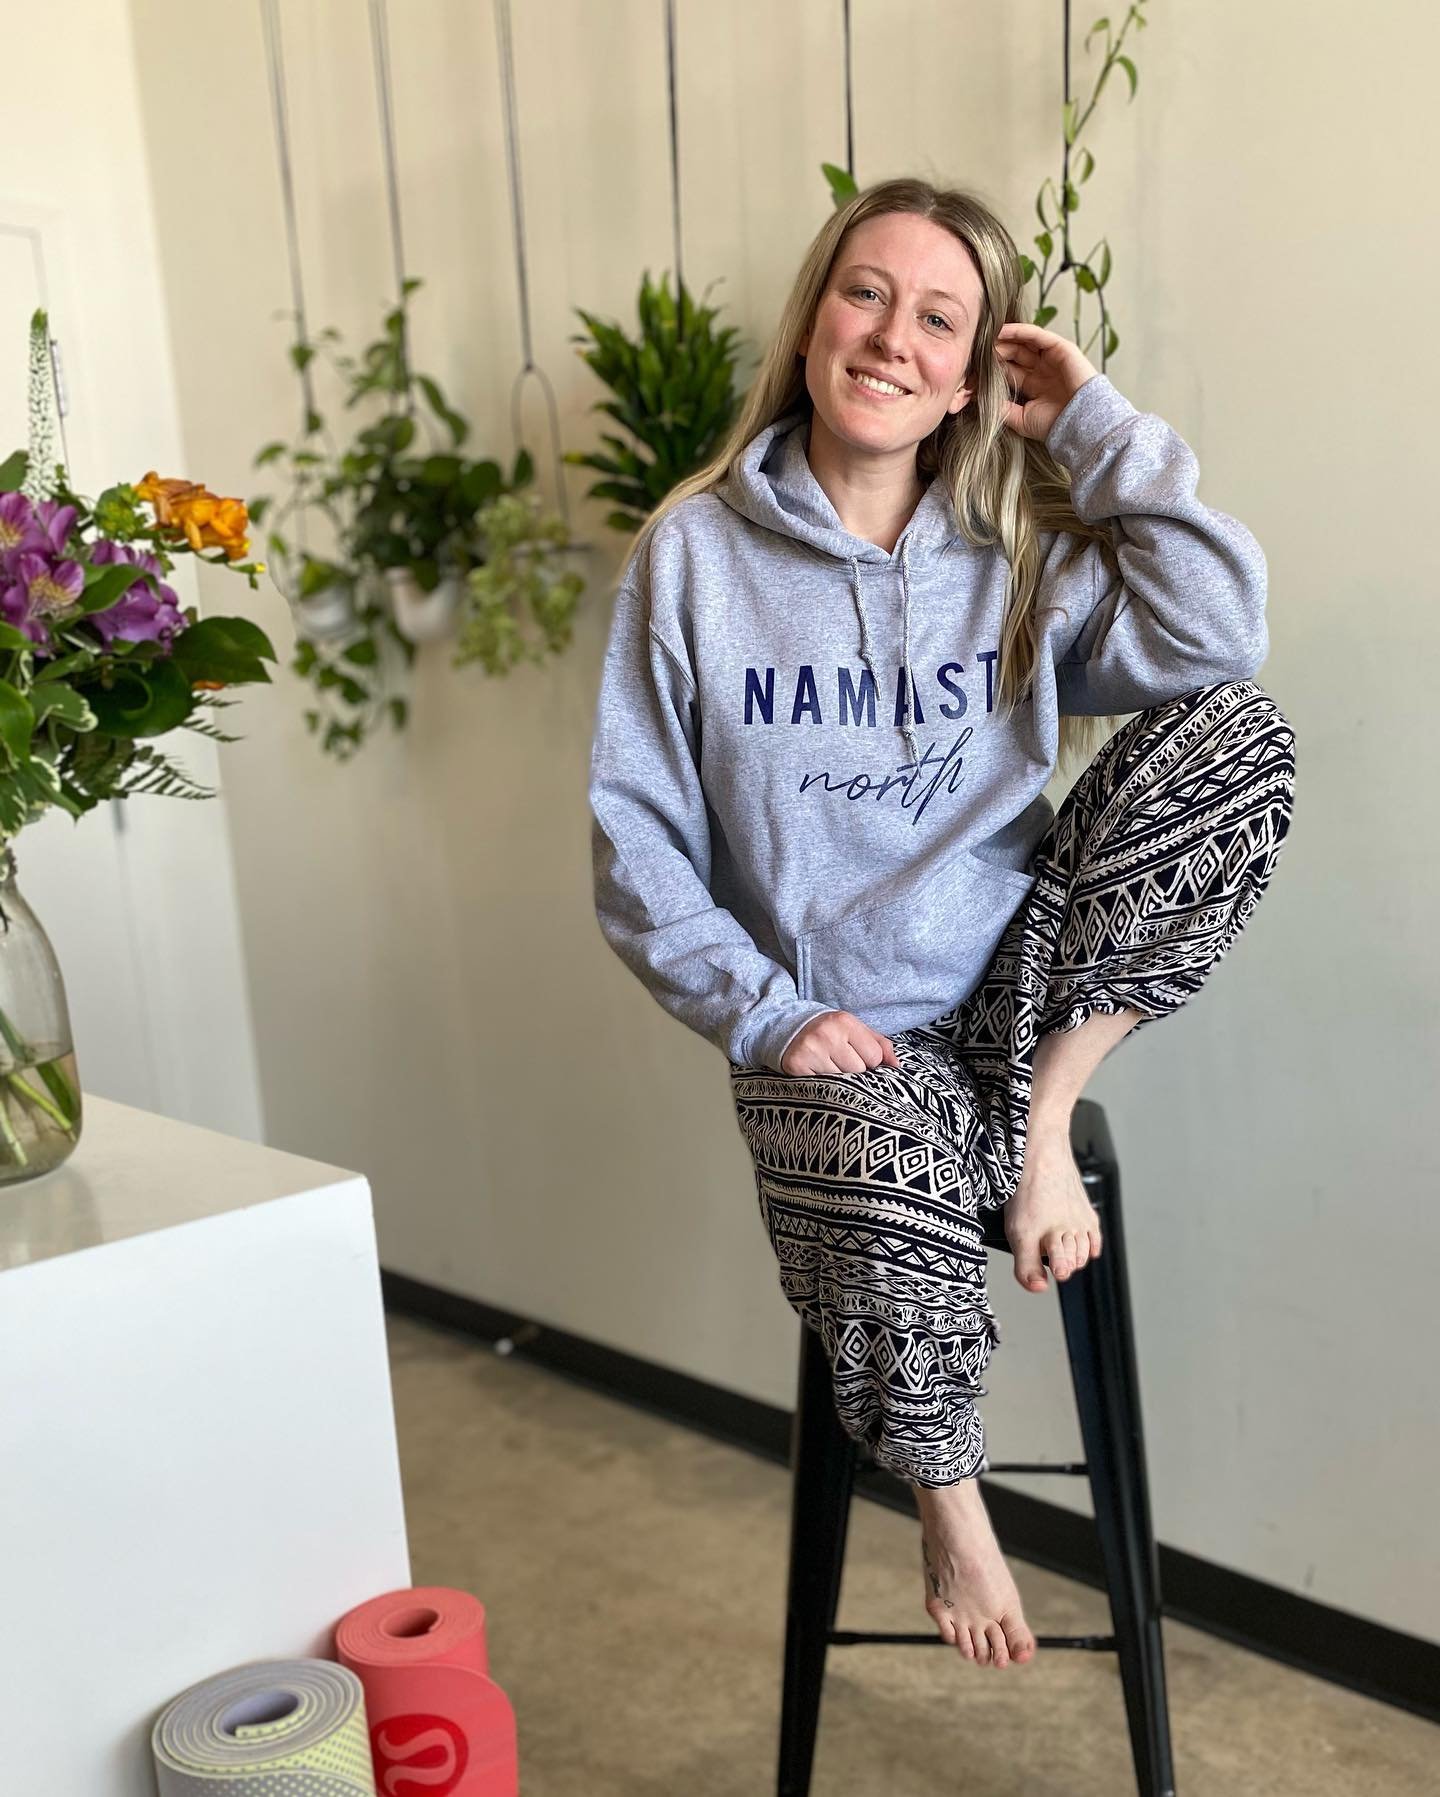 HOODIES ARE HERE 🔥🙌
.
&amp; we can&rsquo;t get enough
.
#cozyvibes #namastenorth